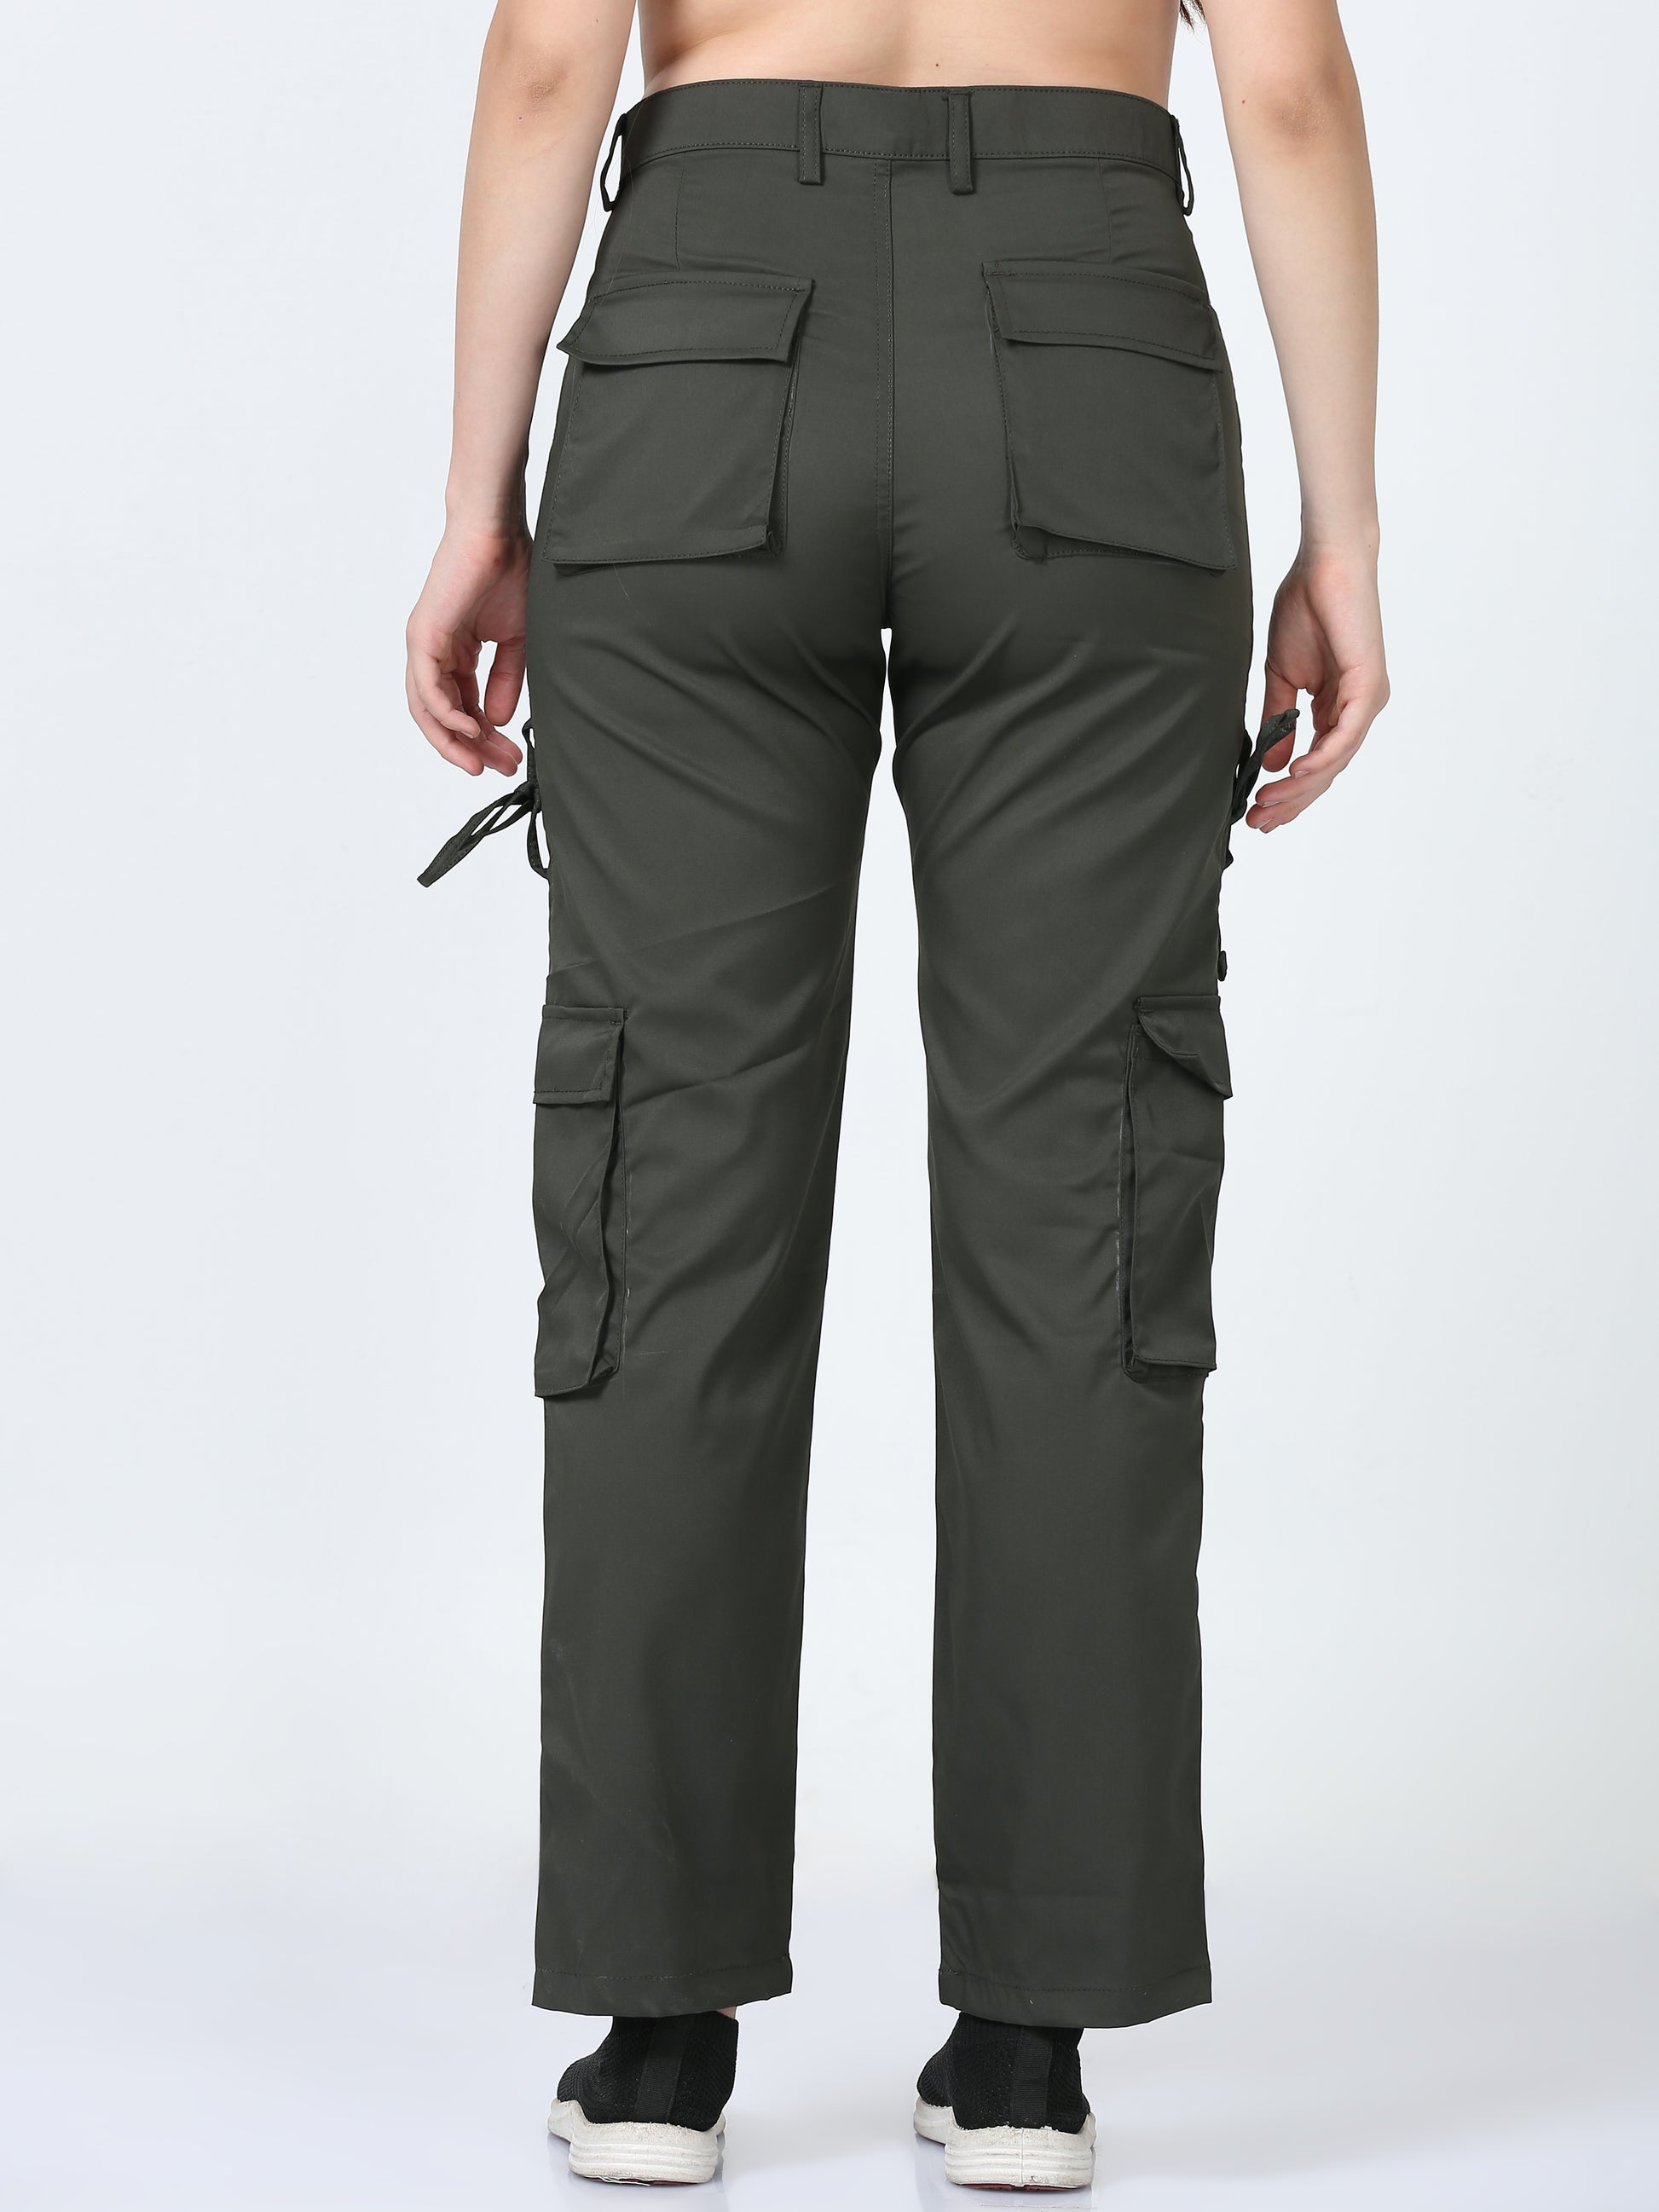 Olive Green Cargo Pants Womens